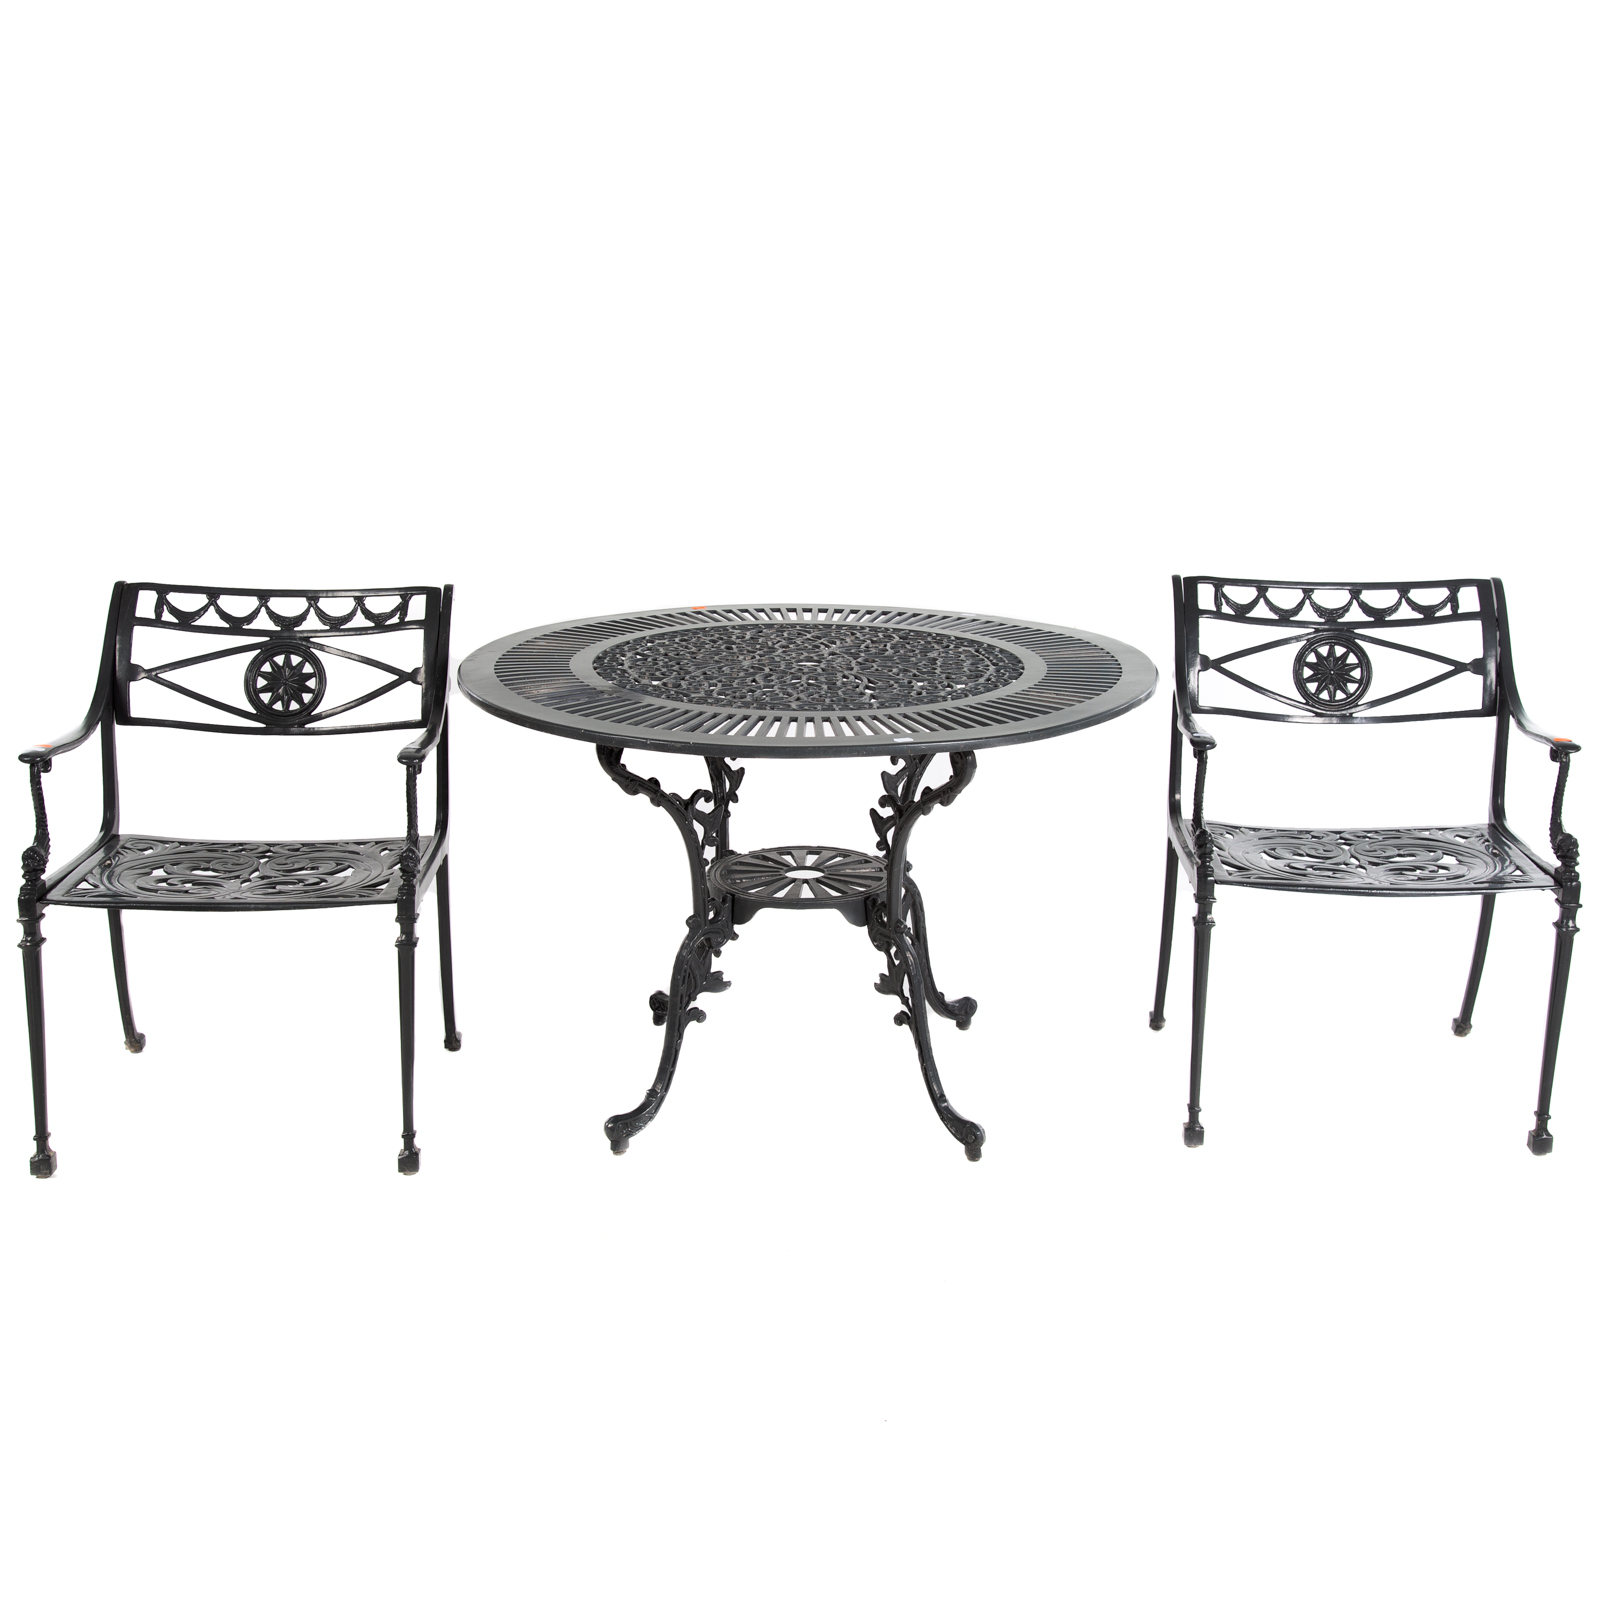 CLASSICAL STYLE METAL PATIO TABLE 2e90a0